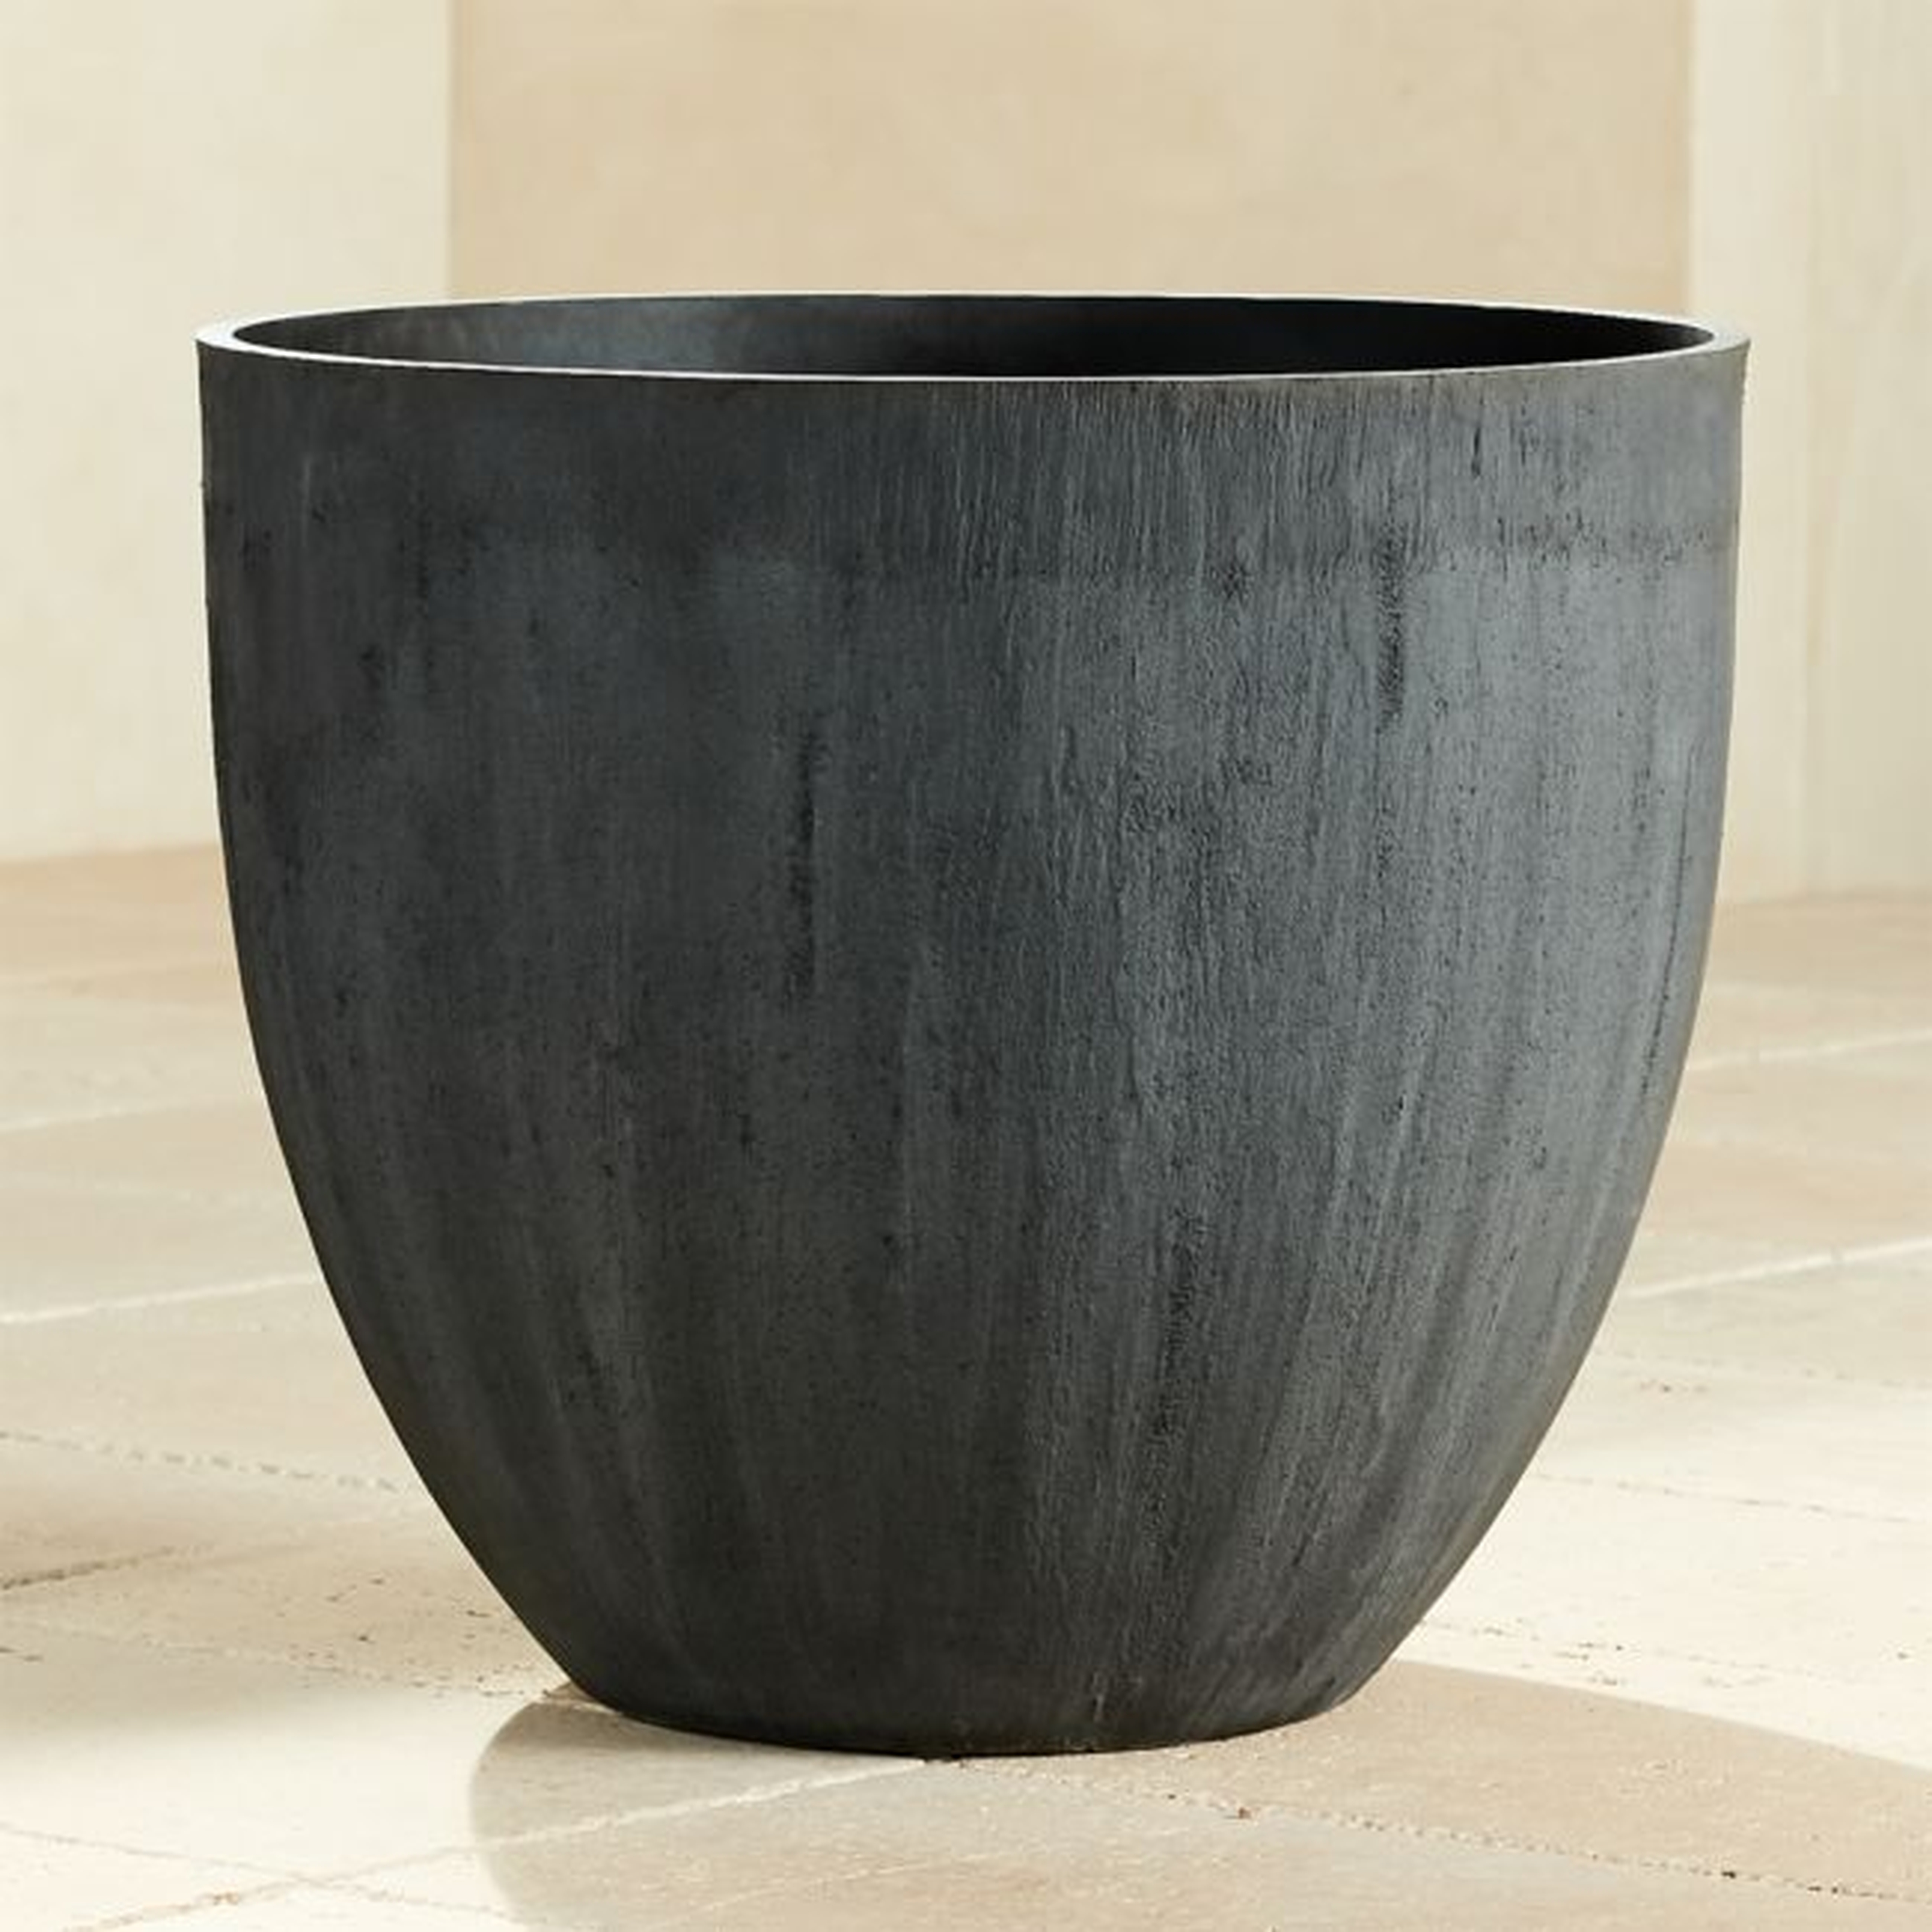 Castino Charcoal Outdoor Planter Large - CB2